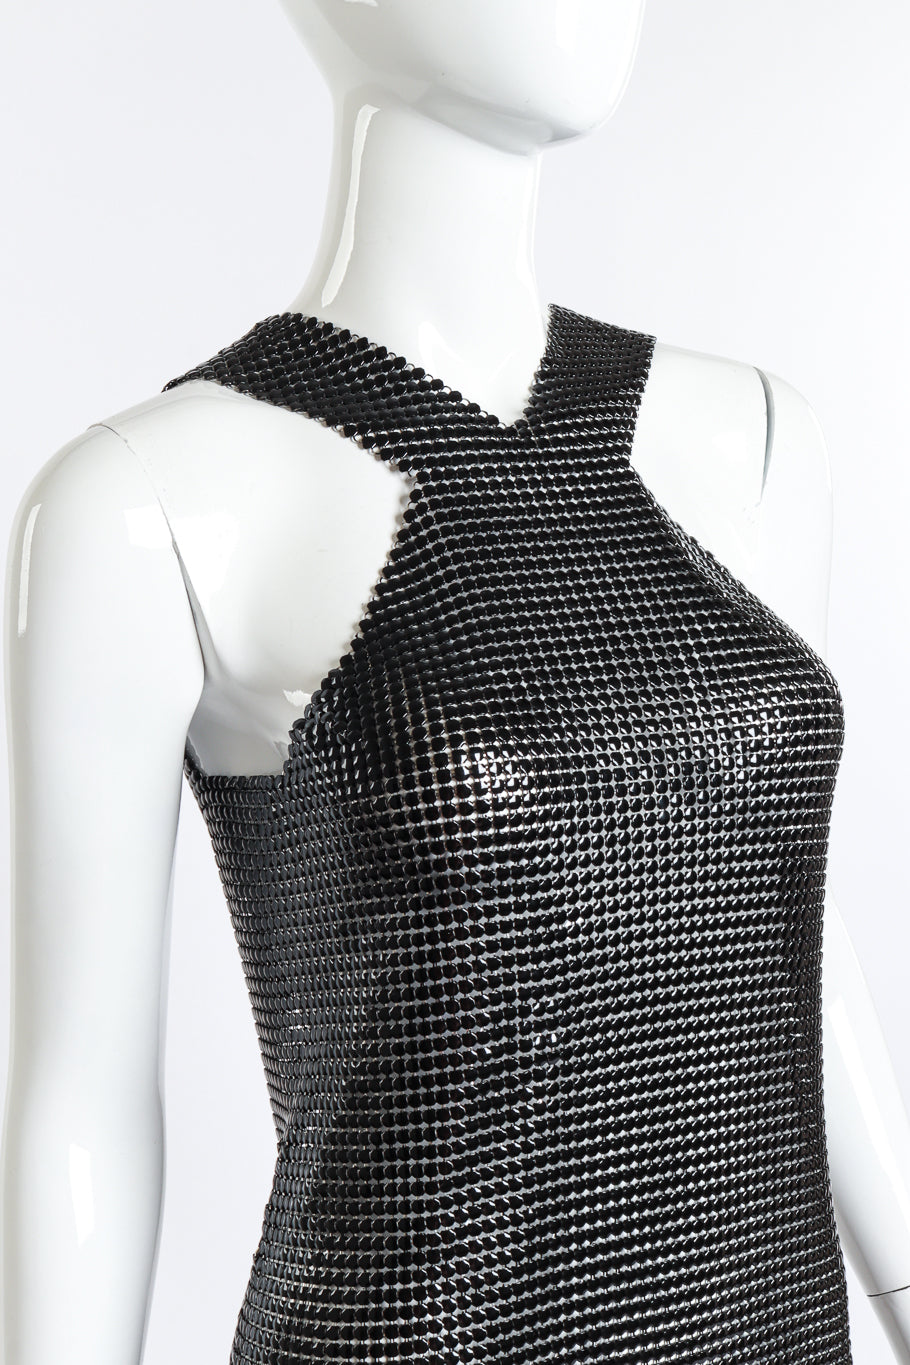 Paco Rabanne Racer Front Chainmail Dress front on mannequin closeup @recess la